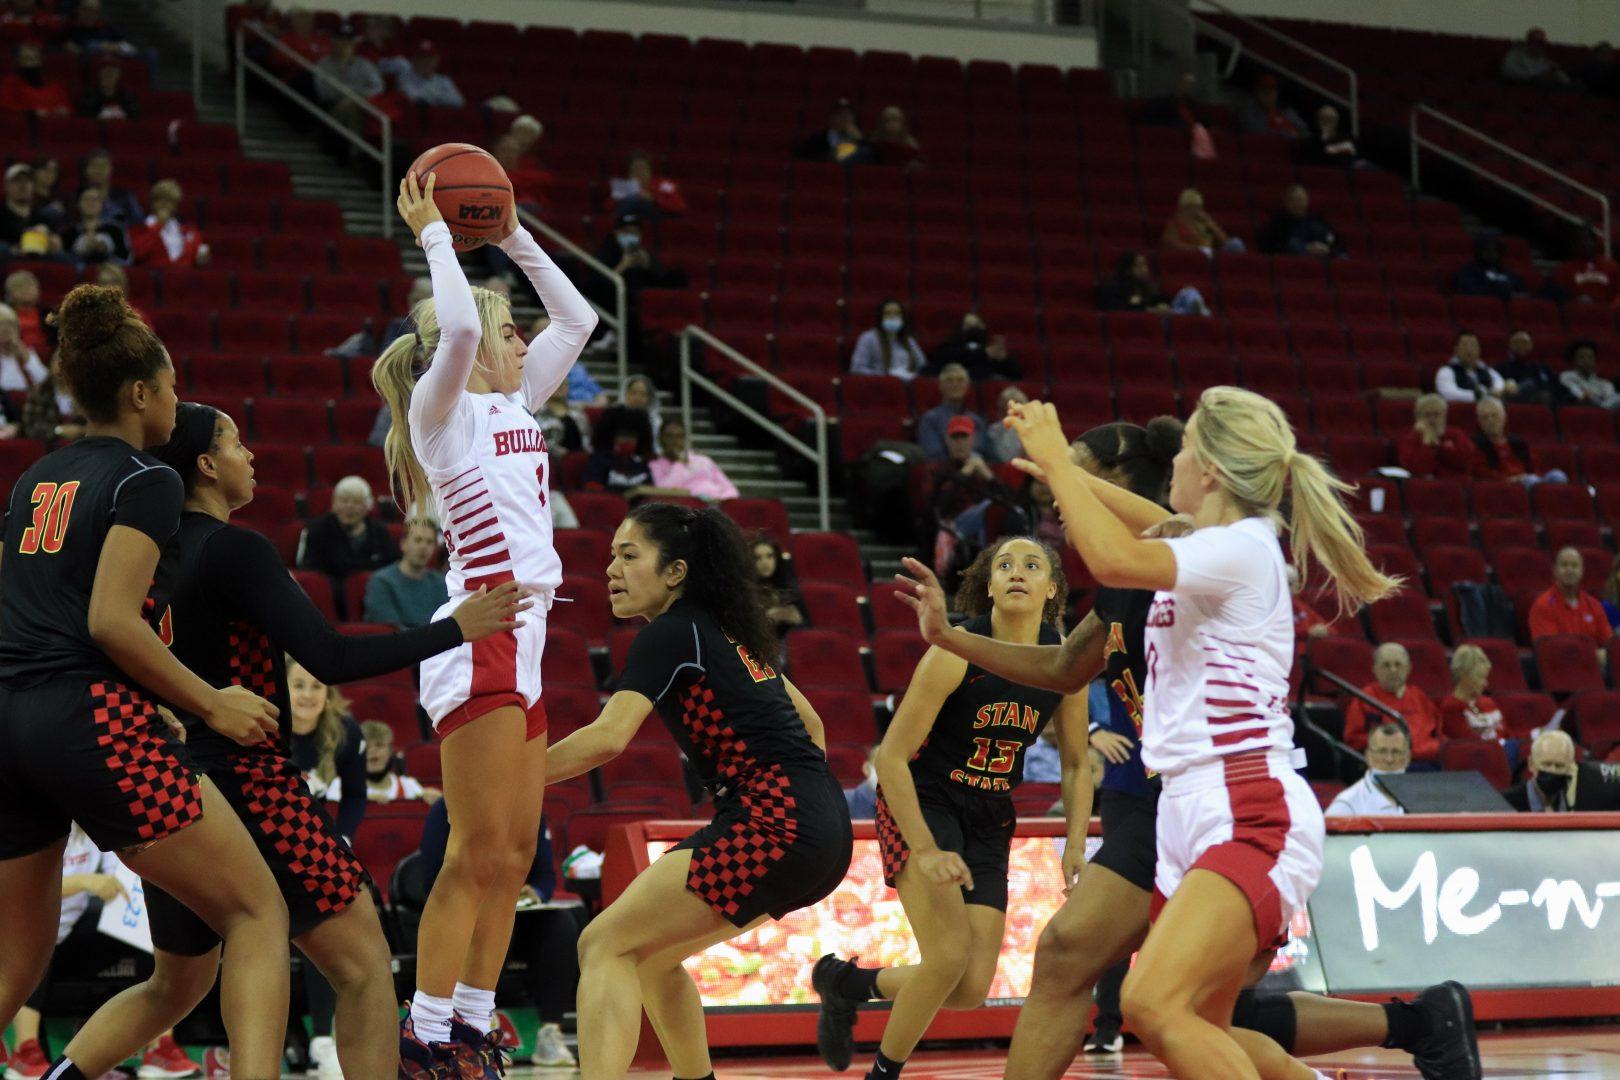 Fresno+State+guards+Hanna+and+Haley+Cavinder+fight+through+double-team+against+Stanislaus+State+on+Wednesday%2C+Nov.+17%2C+2021+at+the+Save+Mart+Center.+%28Melina+Kazanjian%2FThe+Collegian%29